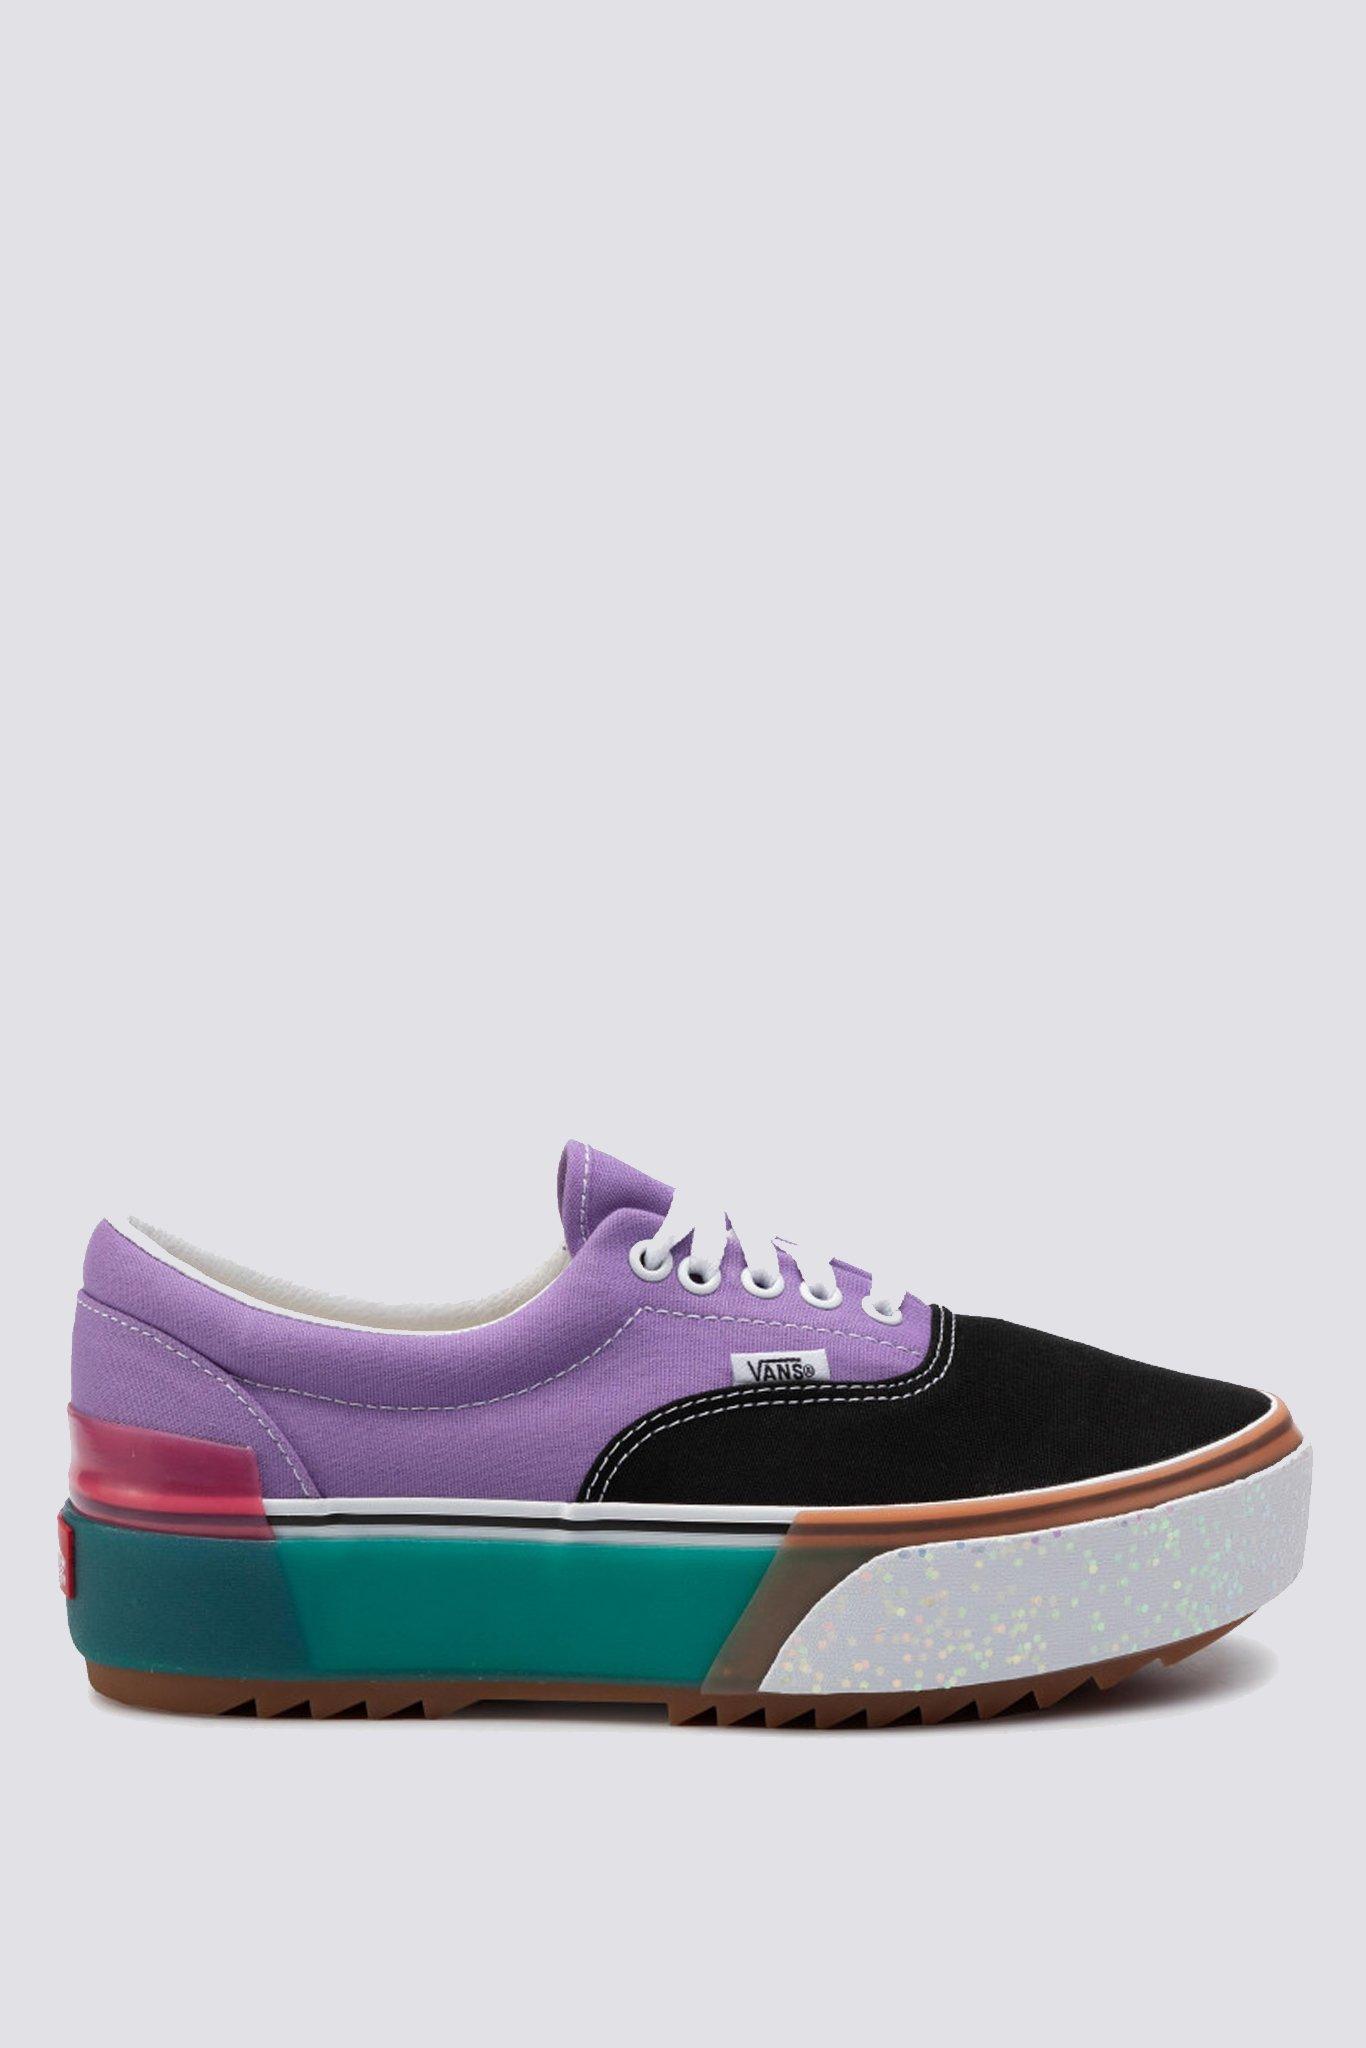 Vans Leather Era Stacked Shoes 